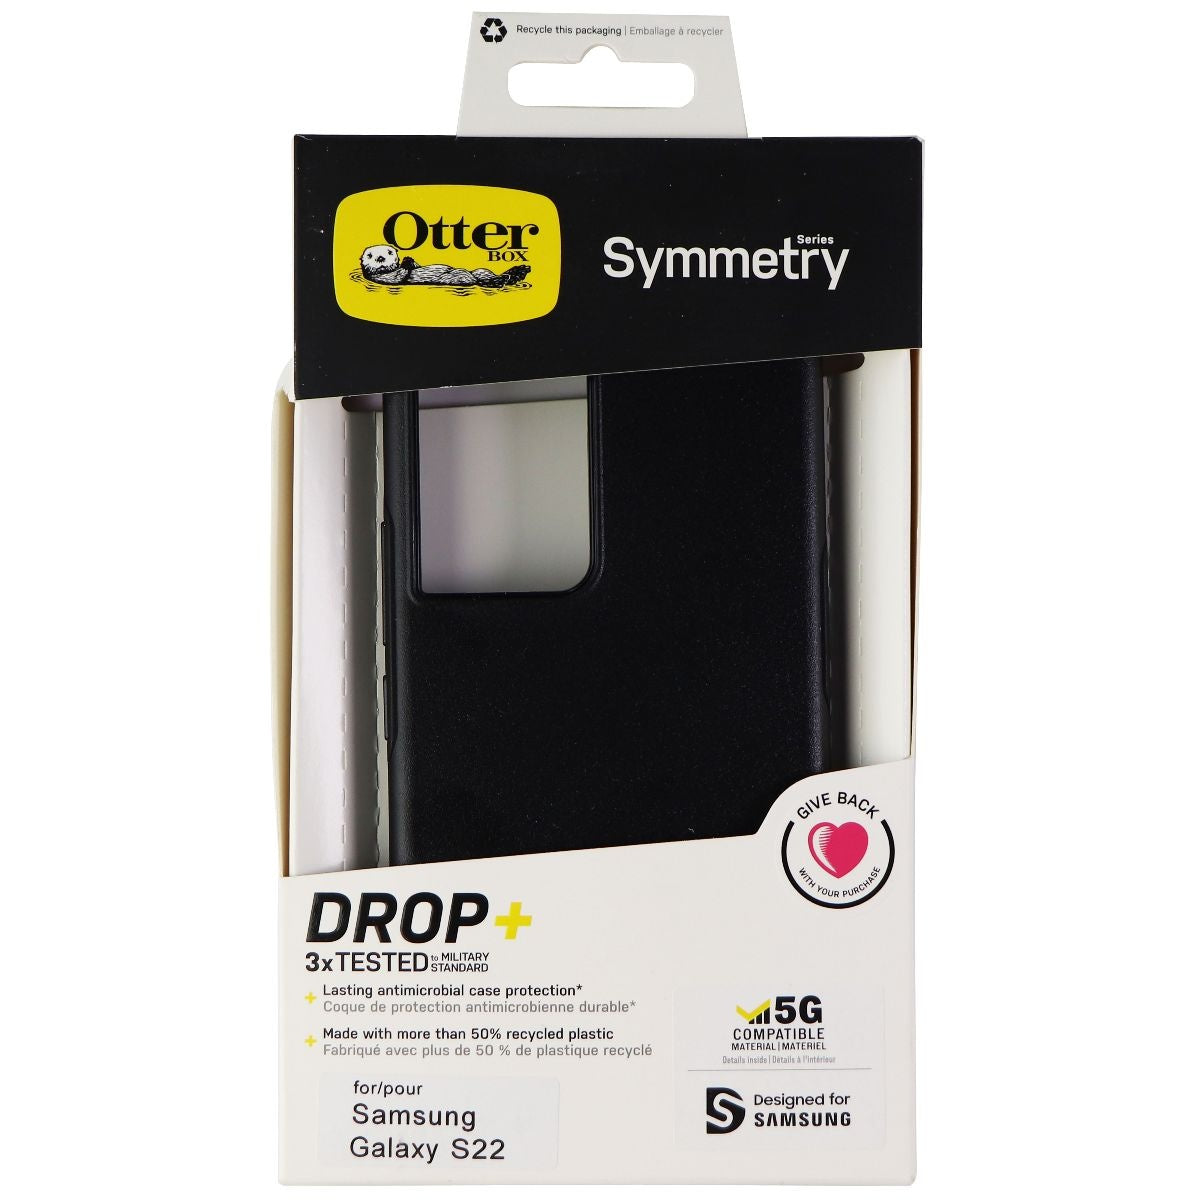 OtterBox Symmetry Series Case for Samsung Galaxy S22 - Black